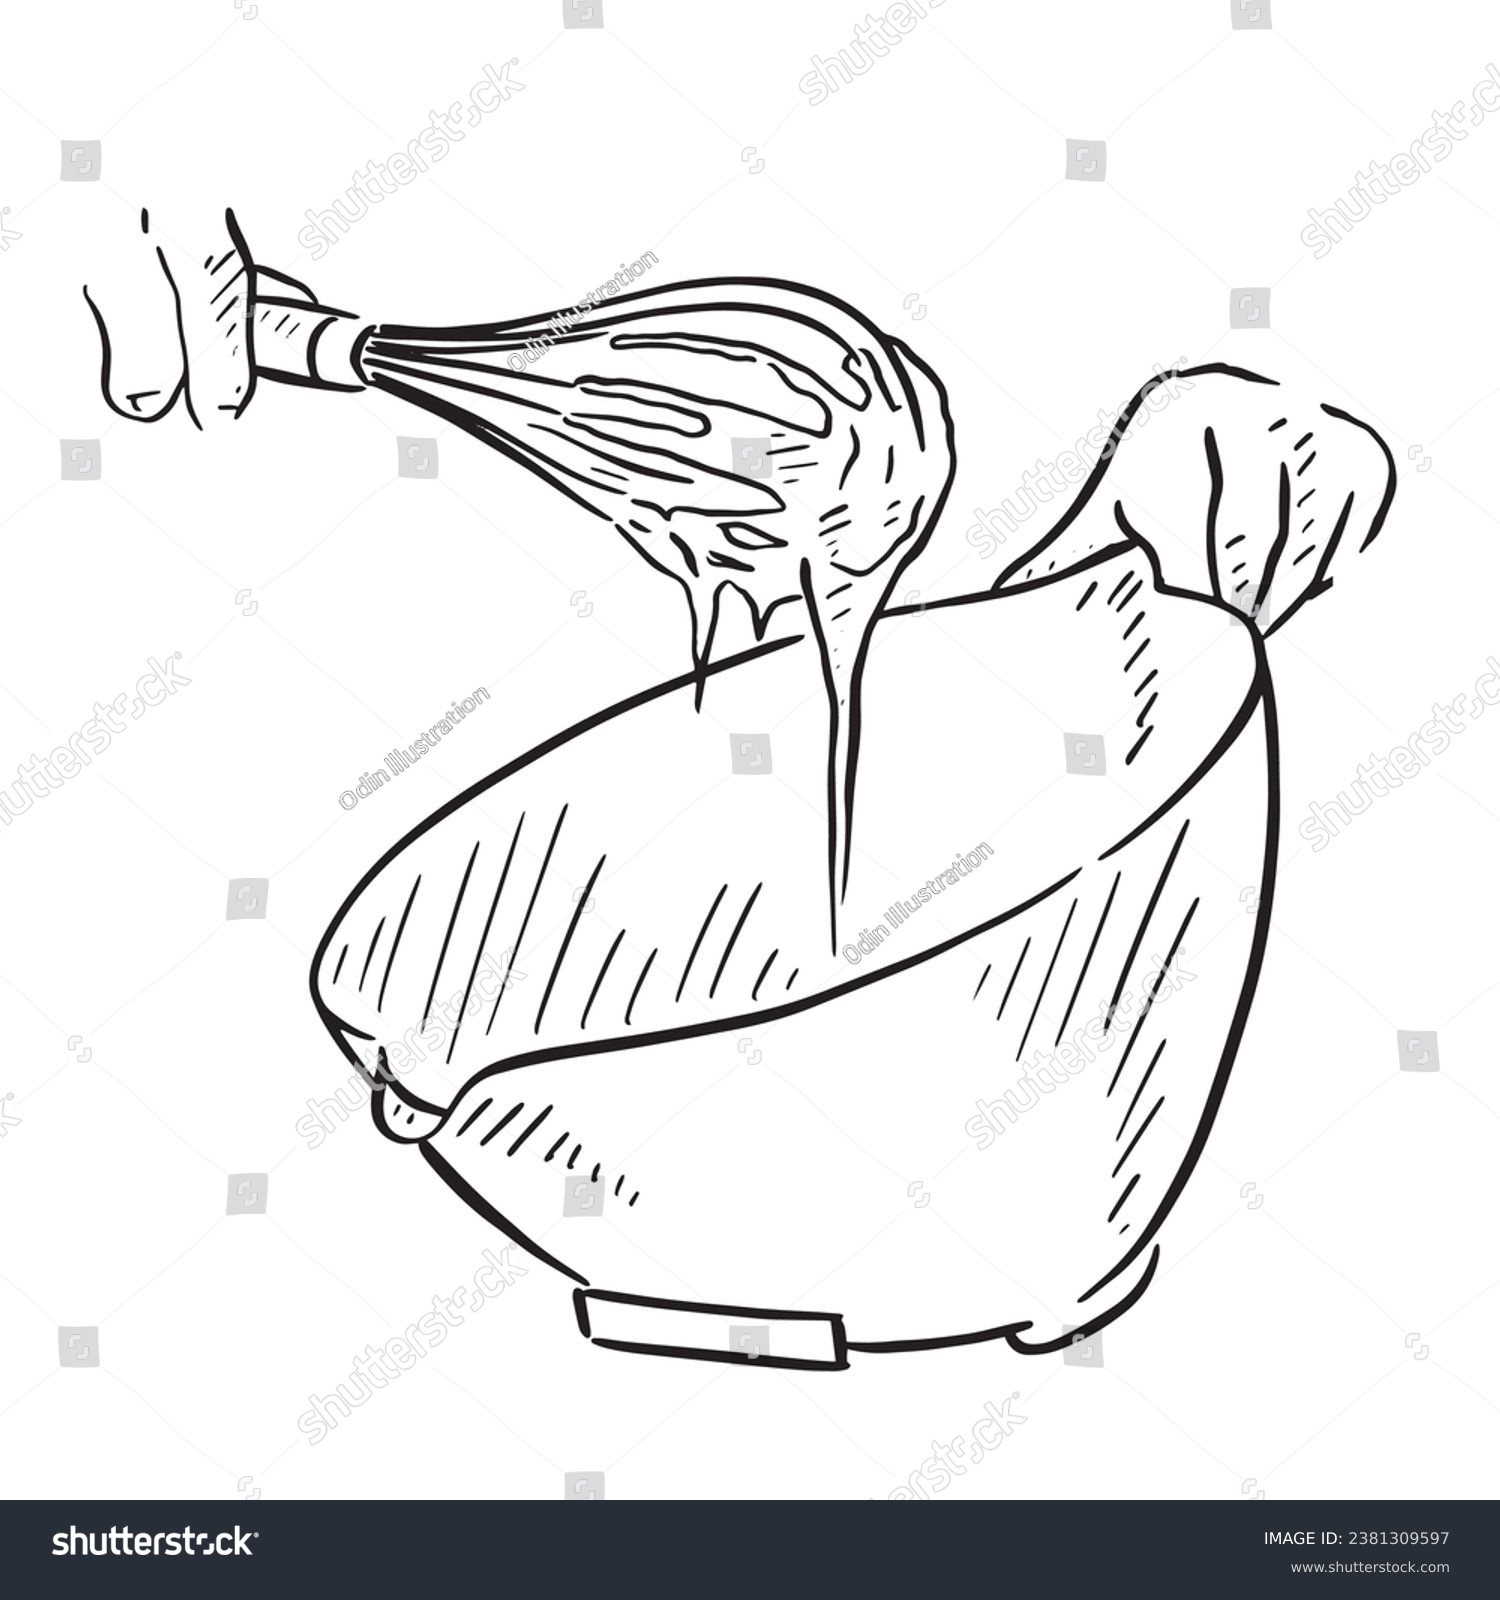 SVG of A line drawing of hands whisking some batter. Dripping from the whisk and into a bowl.  svg